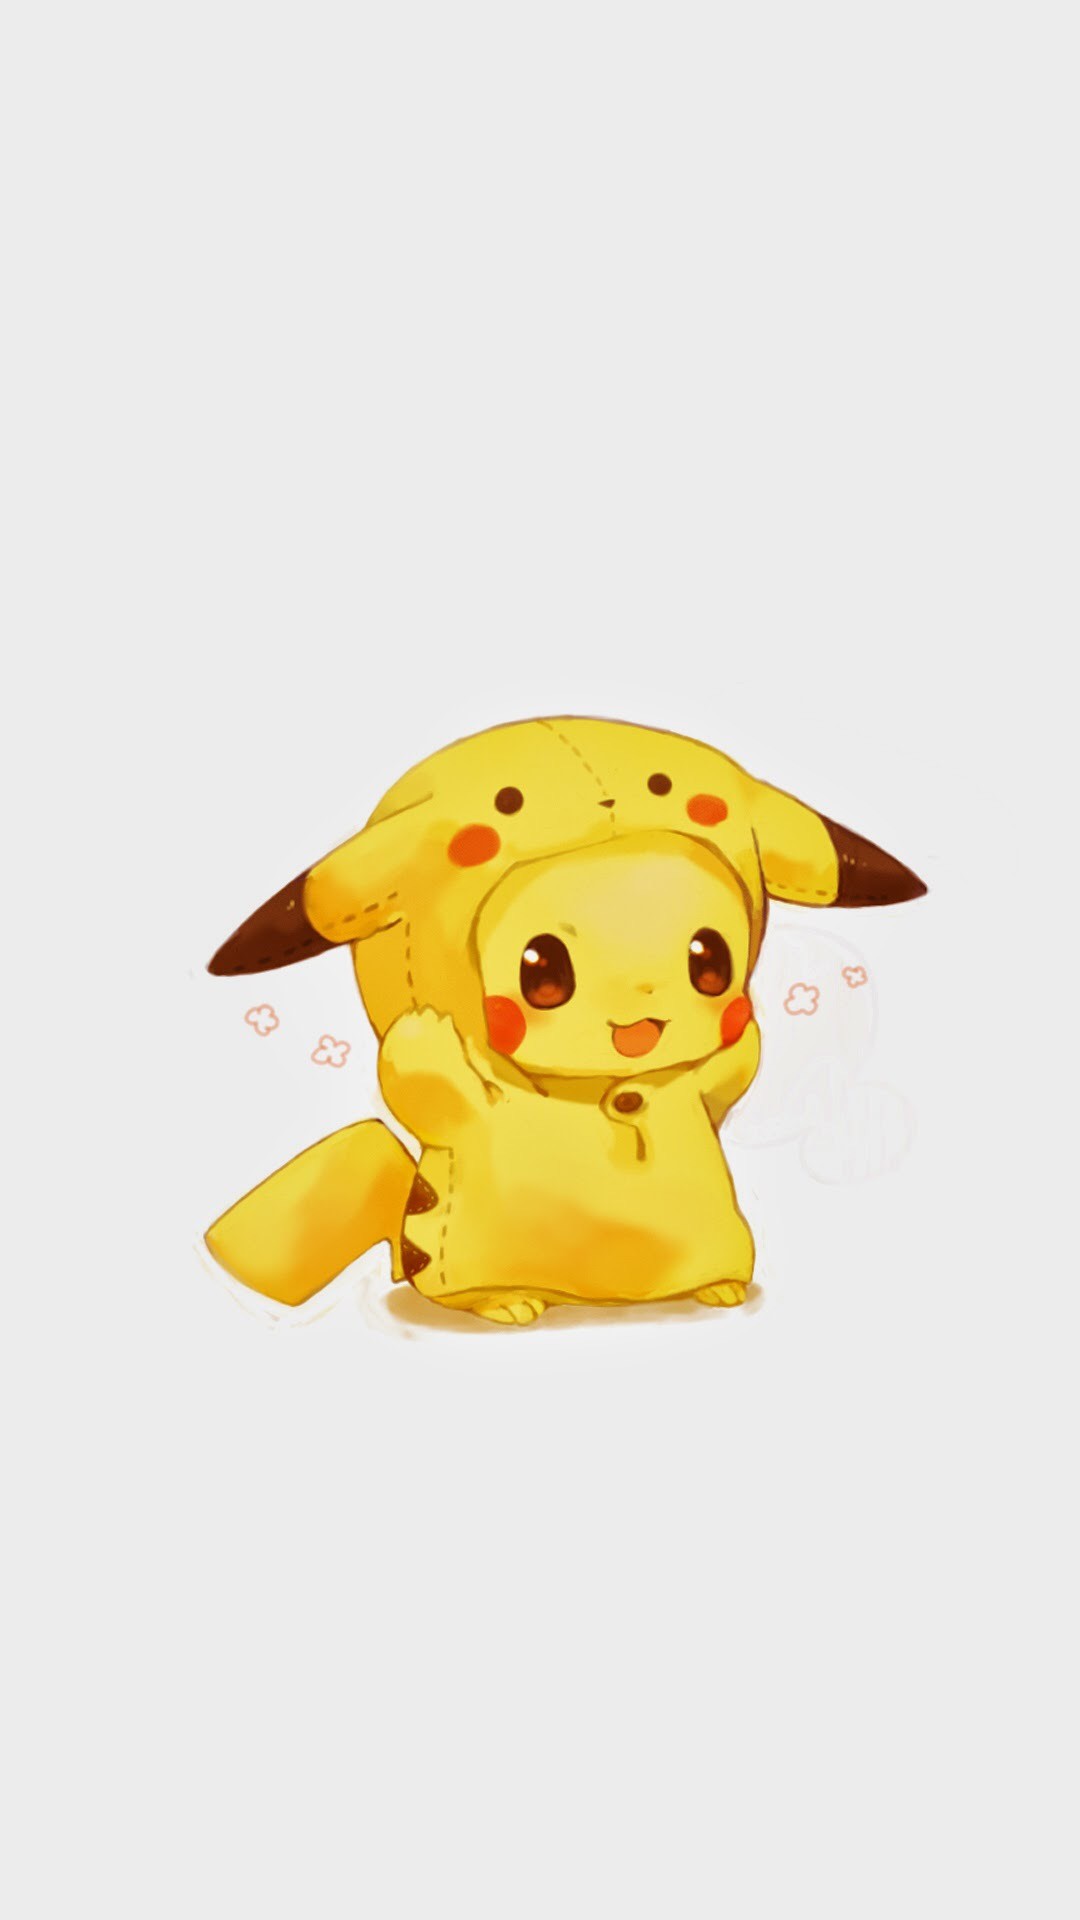 1080x1920 Tap image for more funny cute Pikachu wallpaper! Pikachu - @mobile9 |  Wallpapers for